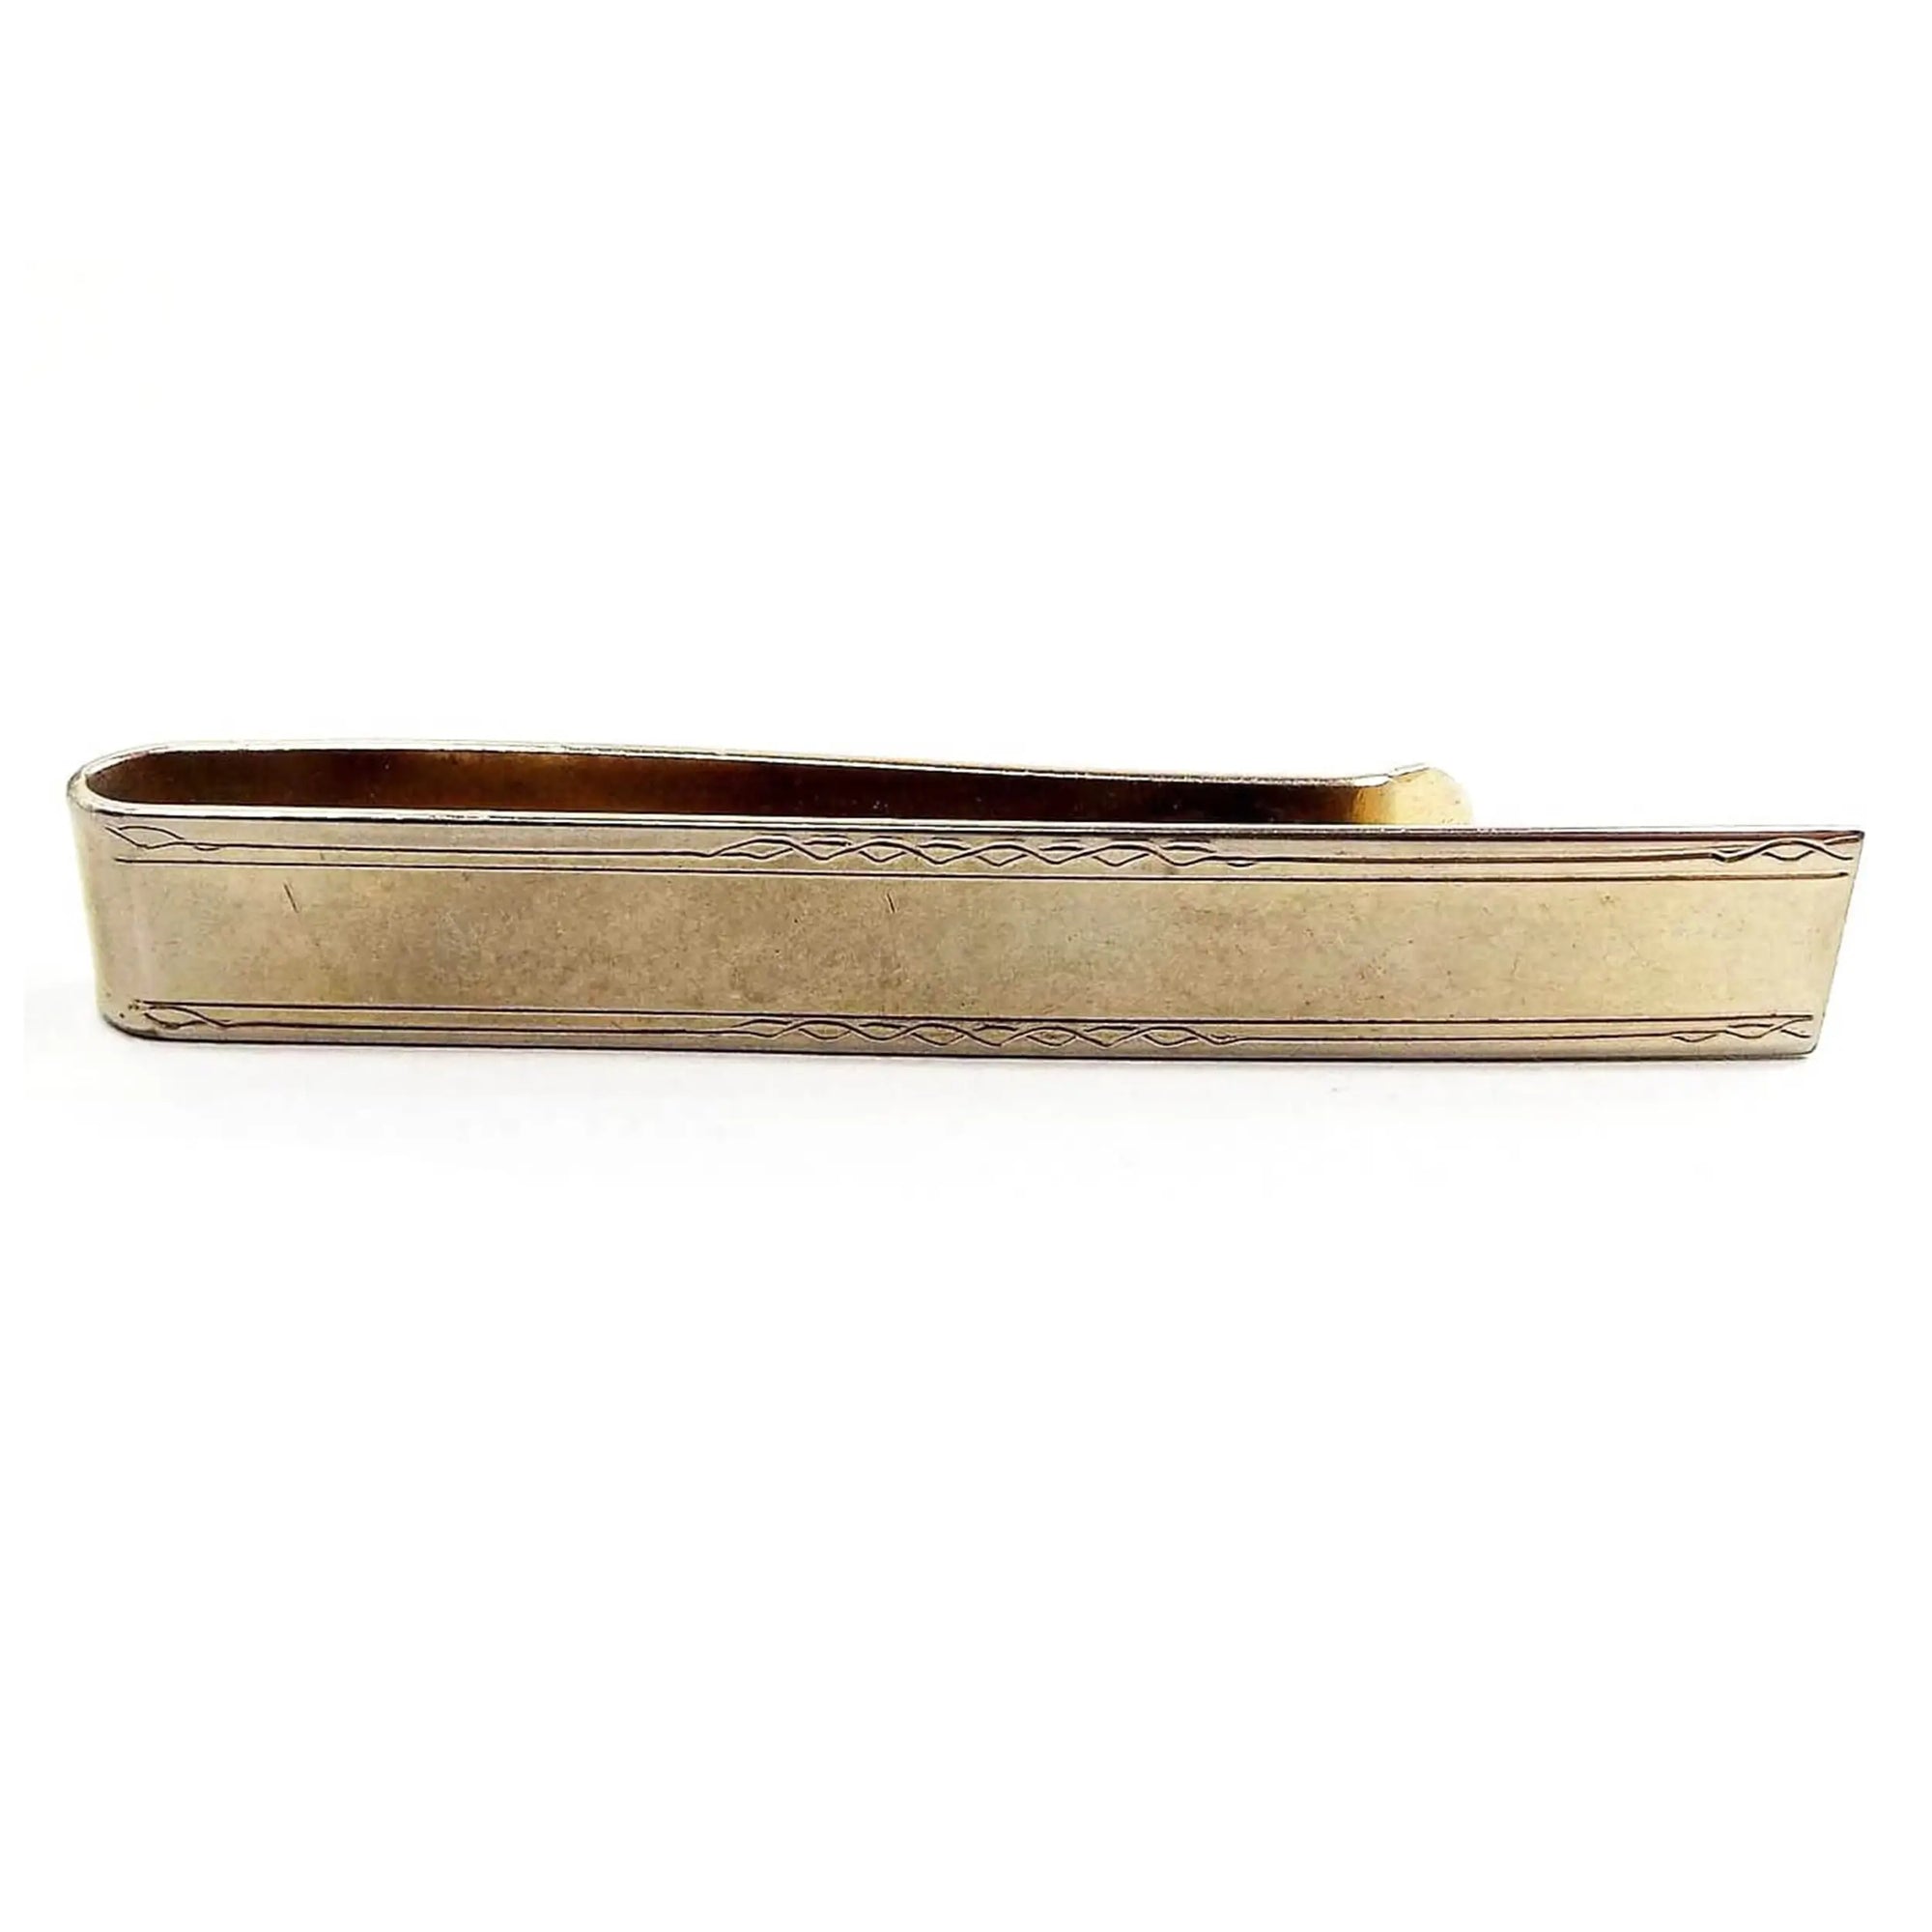 Front view of the Mid Century vintage slide on tie bar. It is a wide long rectangle shape has a light etched design on the edges. The metal is darkened gold tone in color.